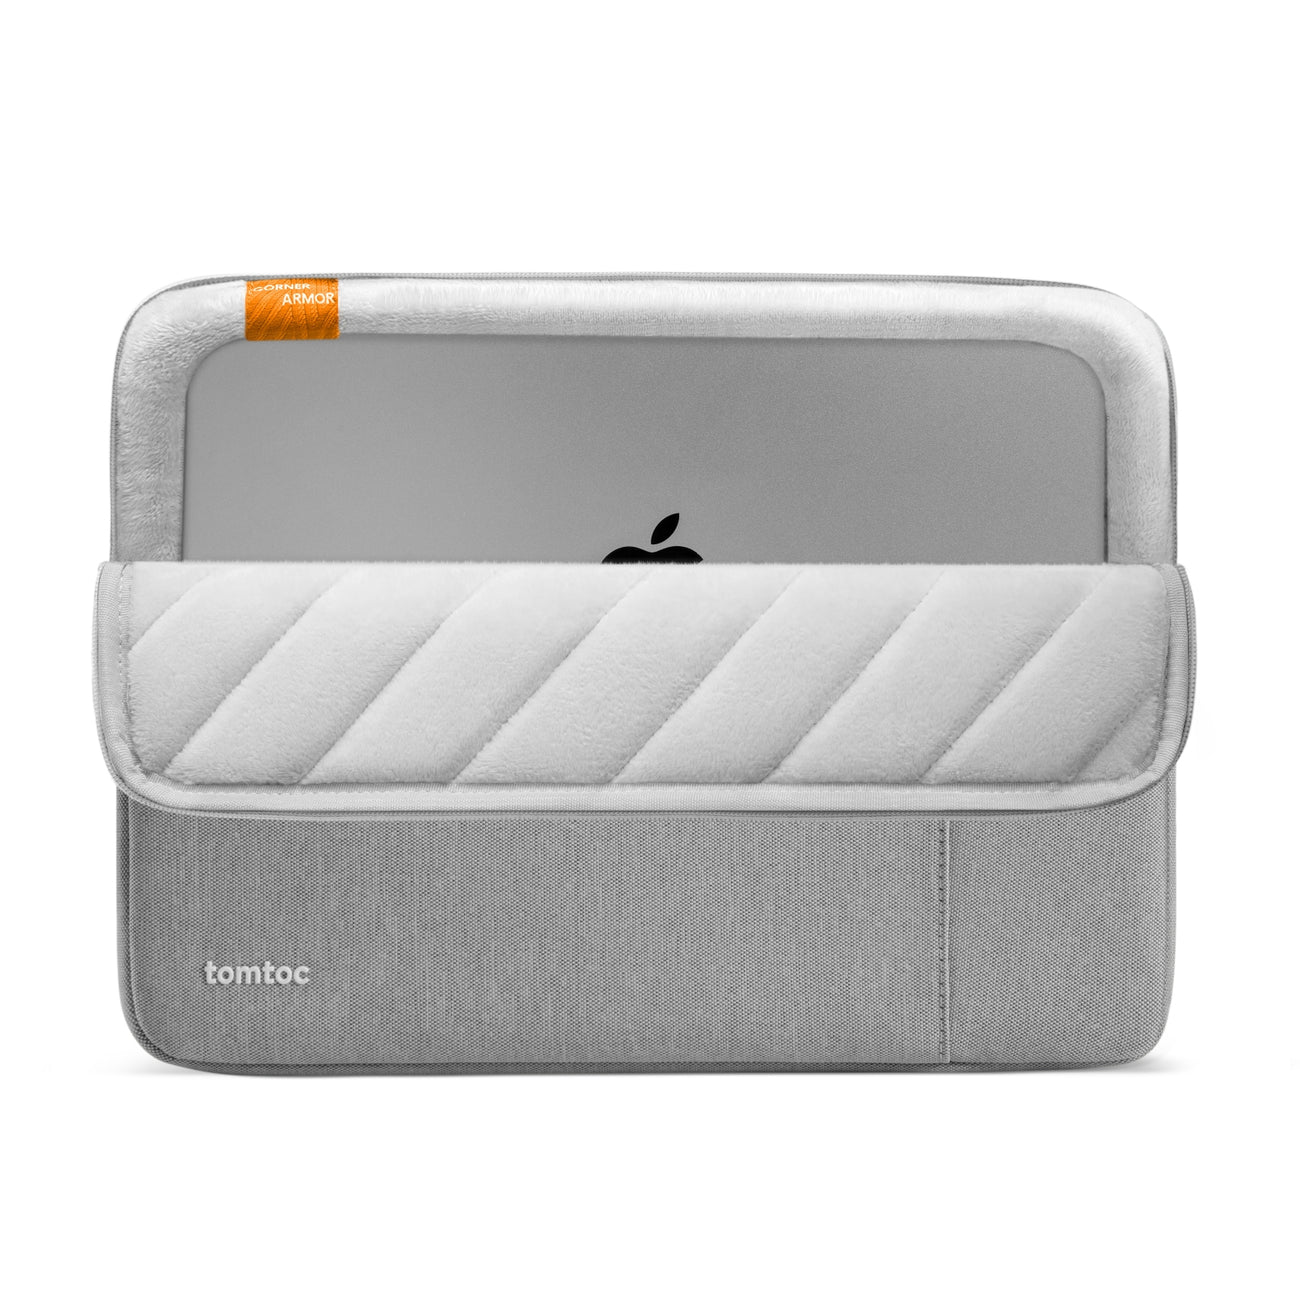 tomtoc Protective Sleeve for MacBook Air / Pro 13" - Gray